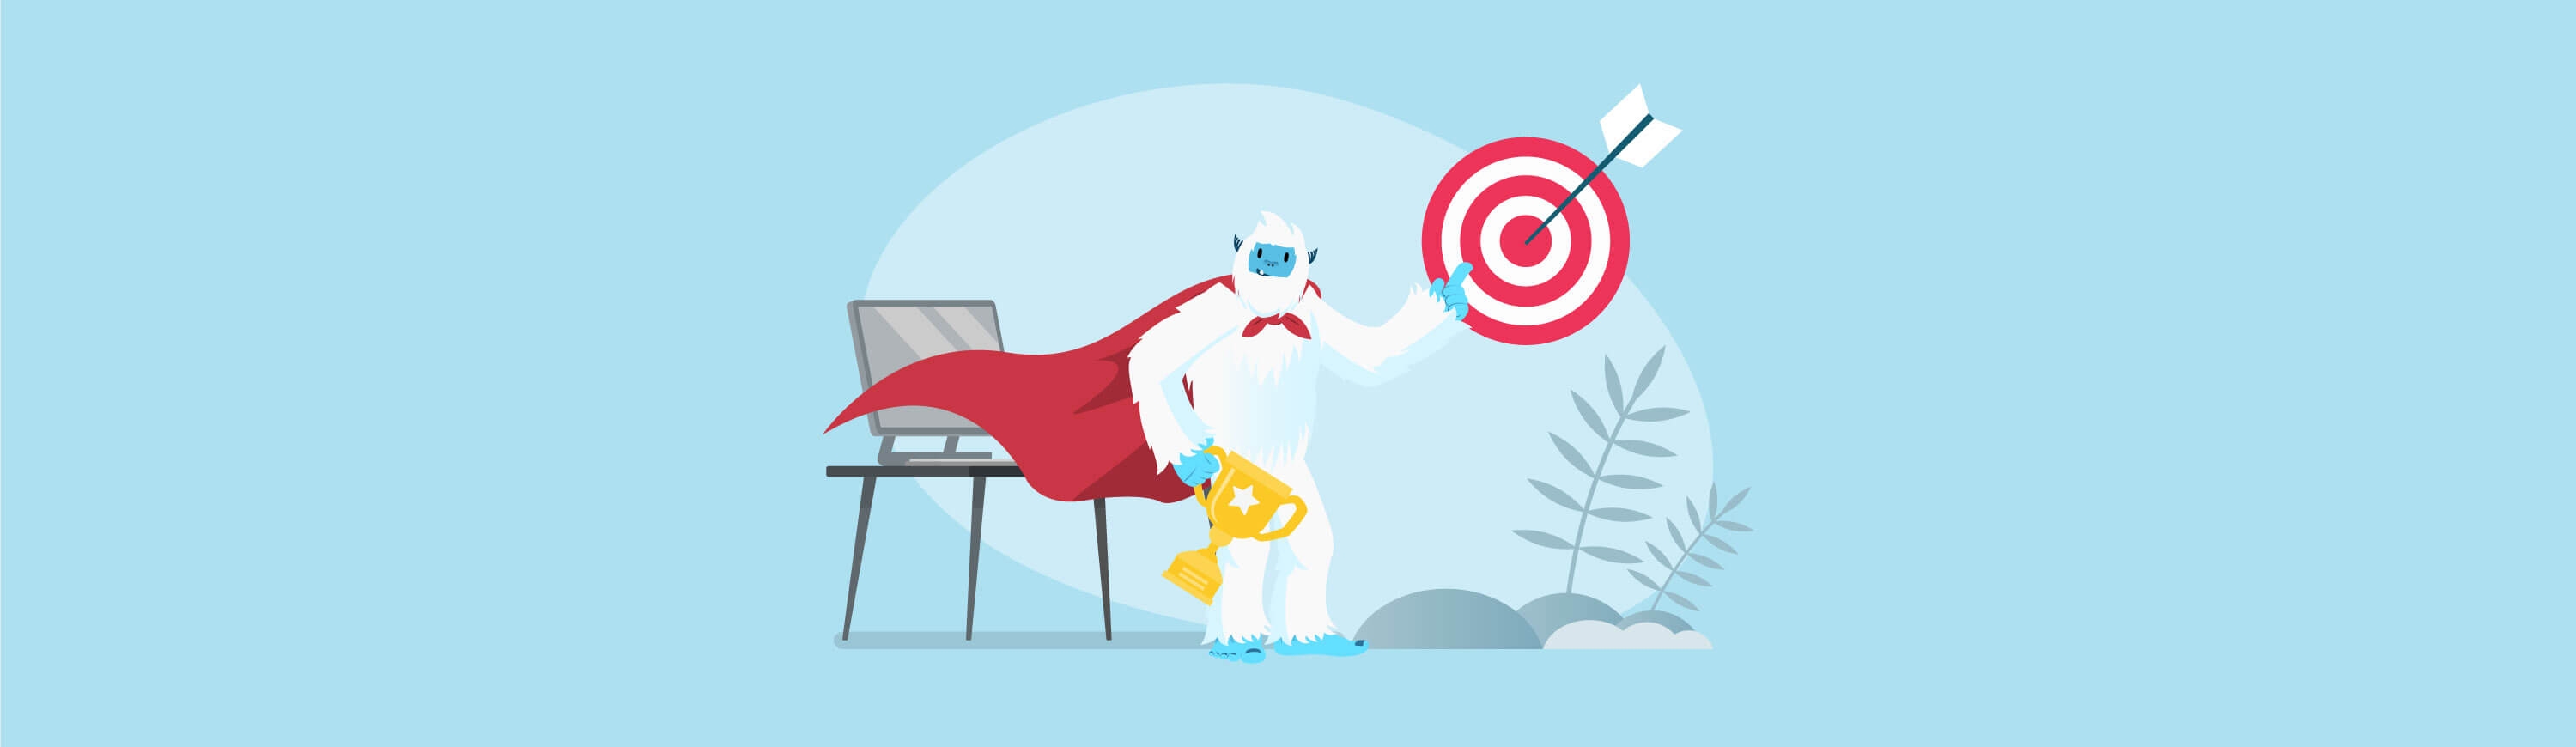 Illustration of Carl the yeti holding a target with an arrow in it and a trophy. He is also wear a superhero cape.